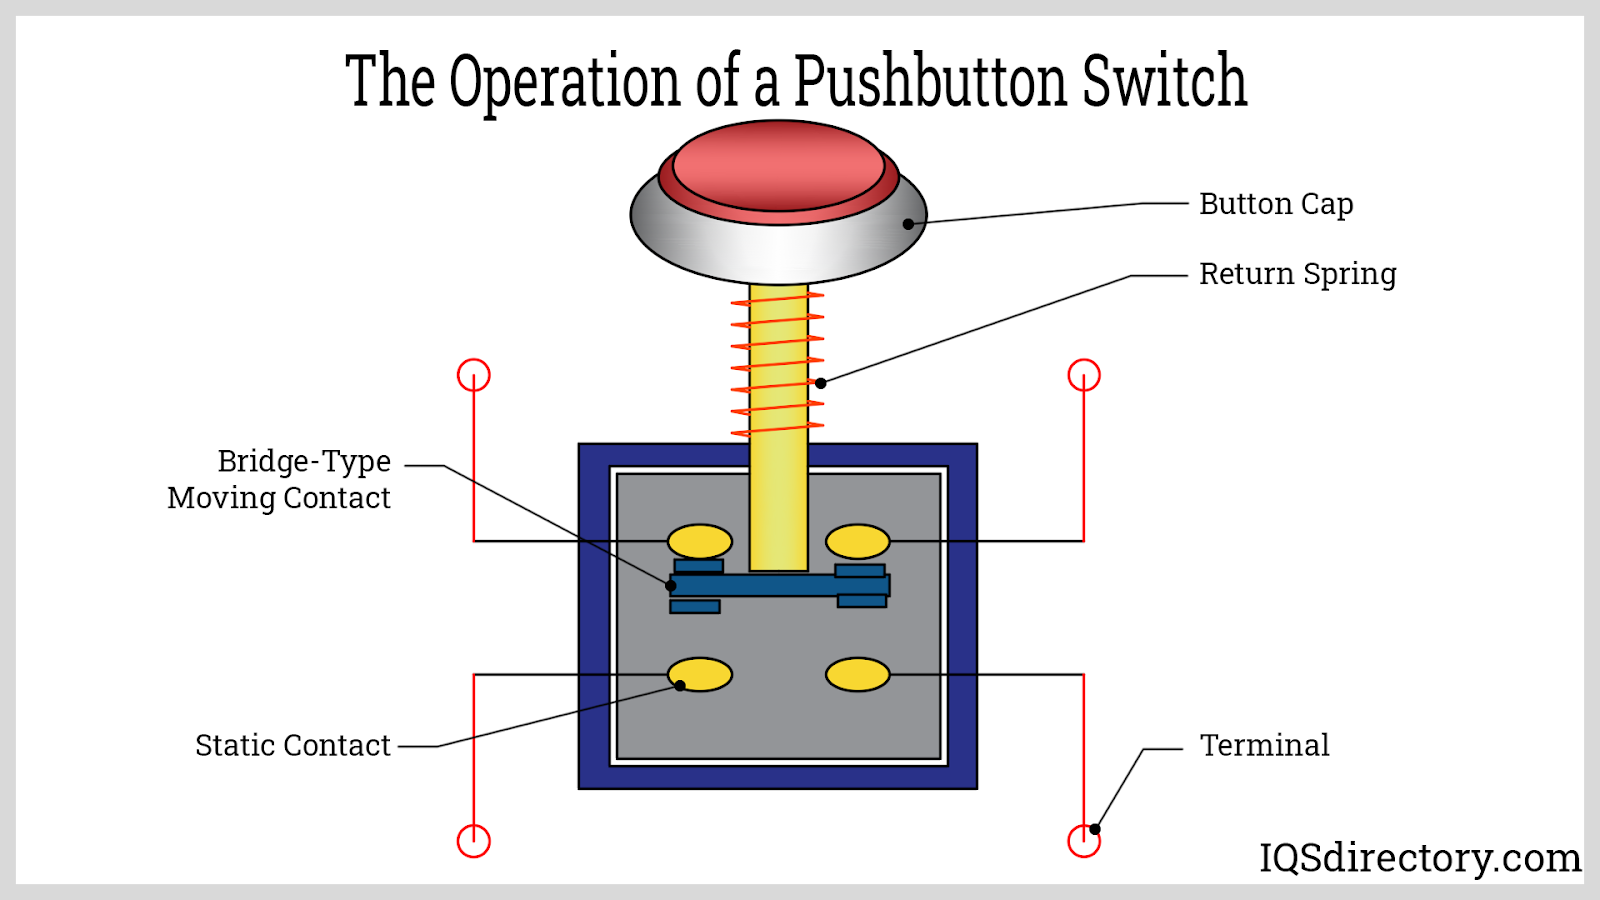 Push Button Switches: Types, Uses, Features and Benefits